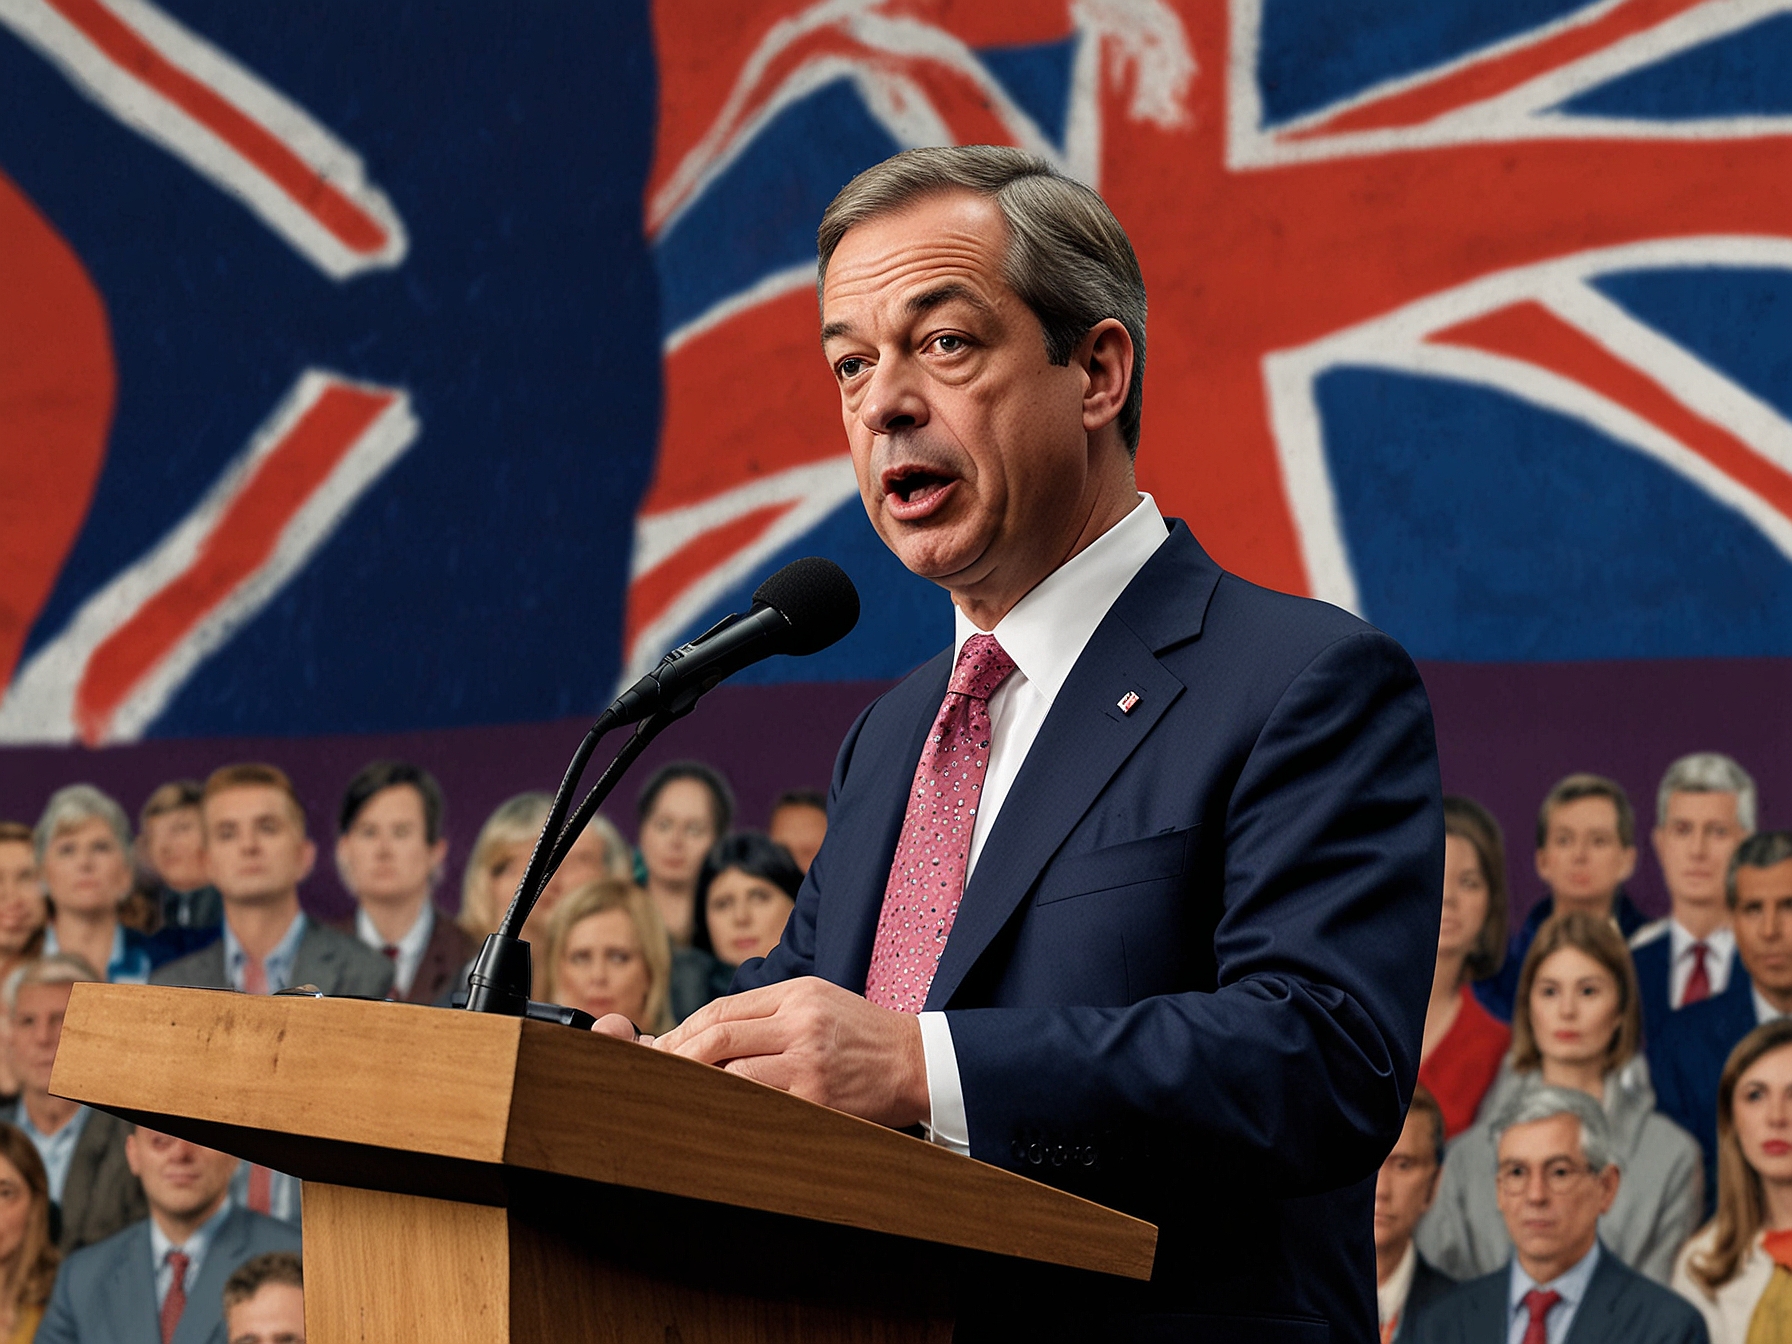 Nigel Farage speaking at a podium during the launch of Reform UK's election manifesto, with a backdrop highlighting key issues such as Brexit, economic reform, and national sovereignty.